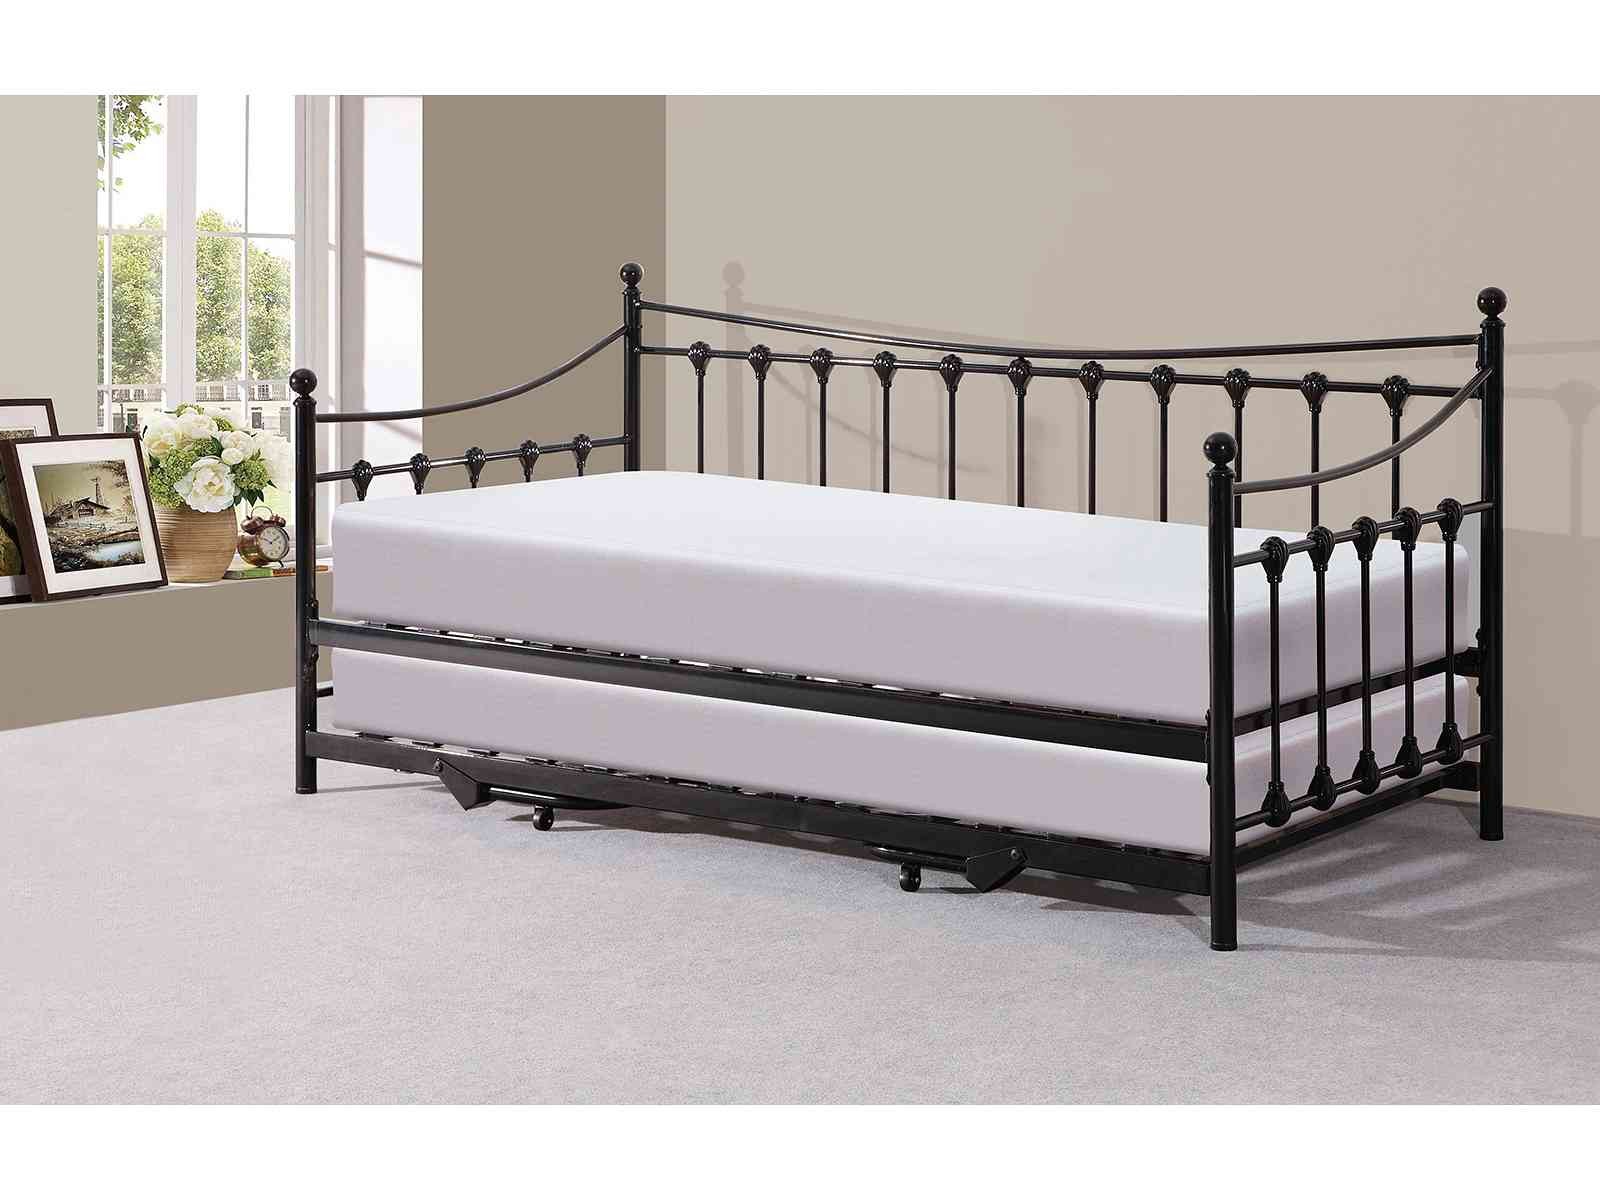 Memphis Day Bed with Trundle Assembly Instructions (GFW)